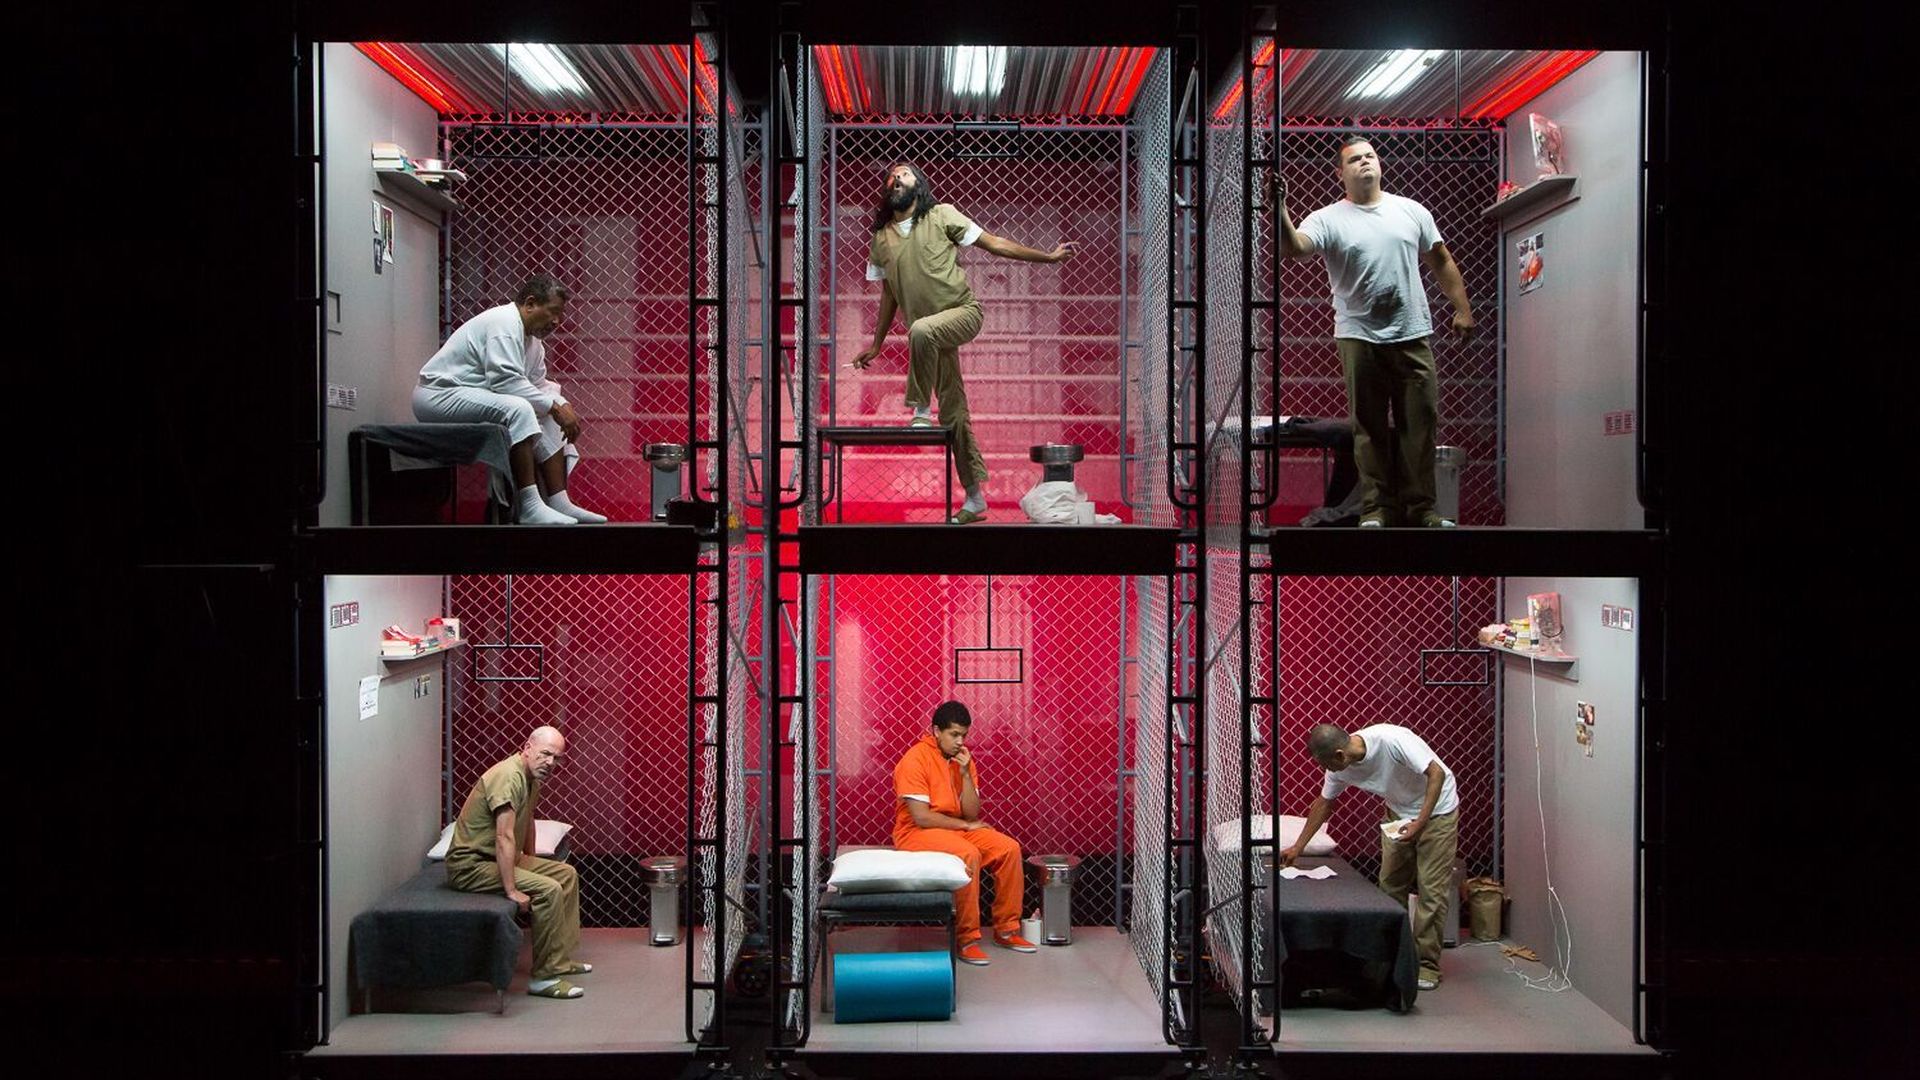 "The Bo" actors are shown in cells stacked on each other on stage.